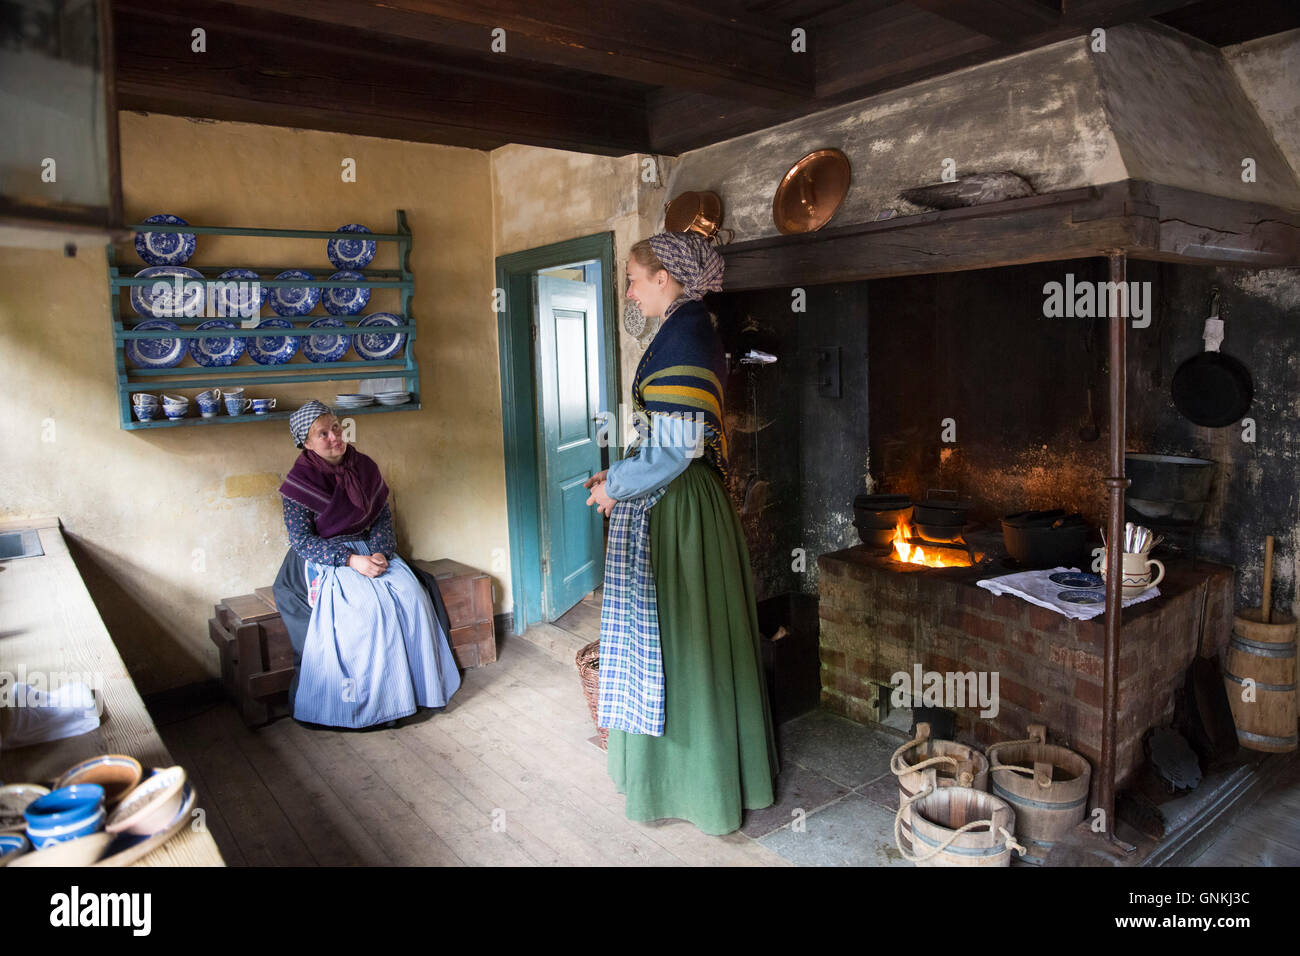 Costume characters and interior at Den Gamle By, The Old Town, open-air folk museum at Aarhus,  East Jutland, Denmark Stock Photo